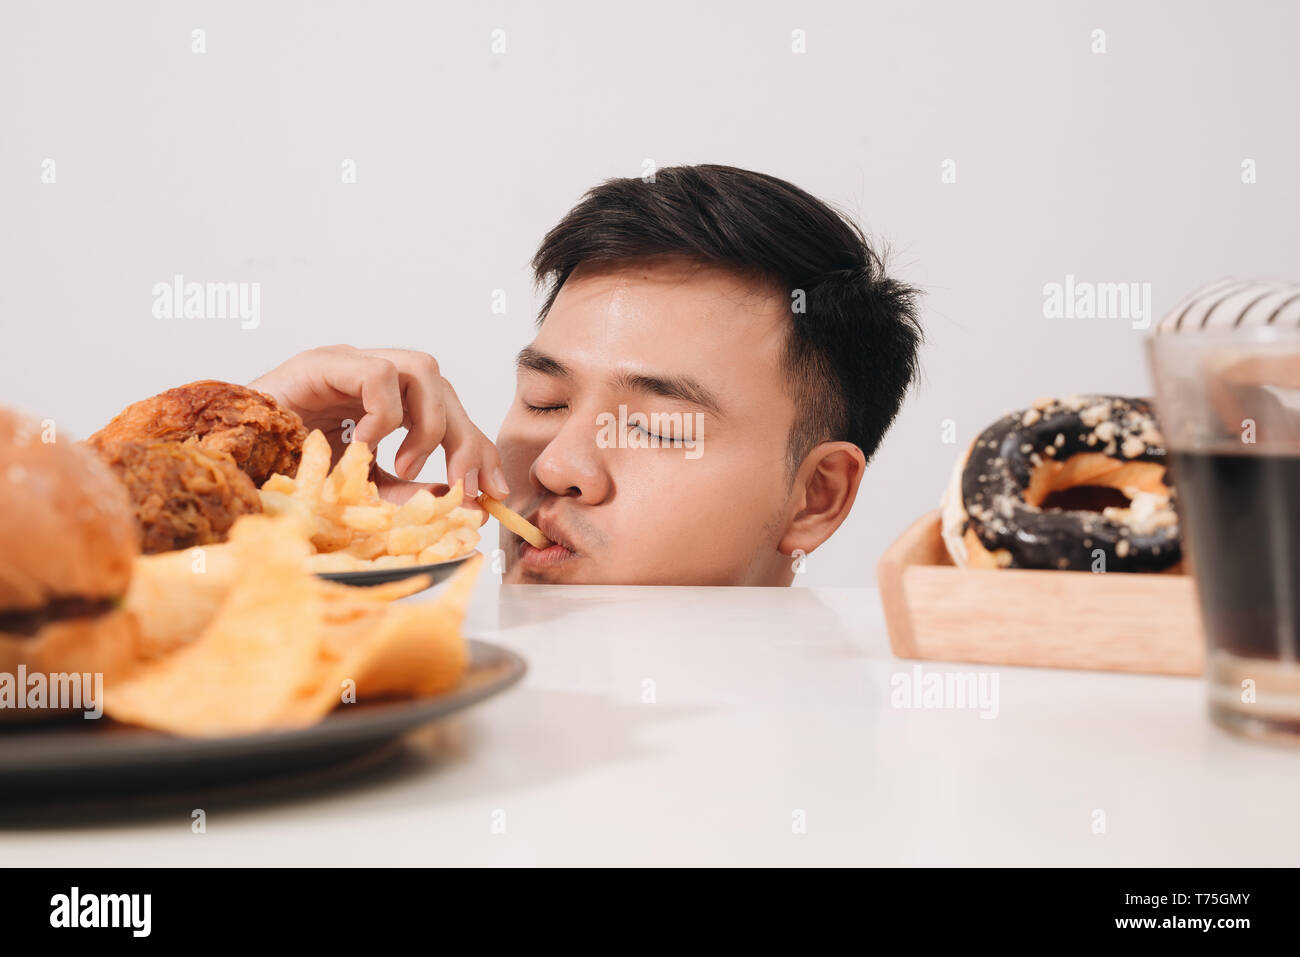 Young man having cravings for donuts, hamburger, chicken with fries instead Stock Photo